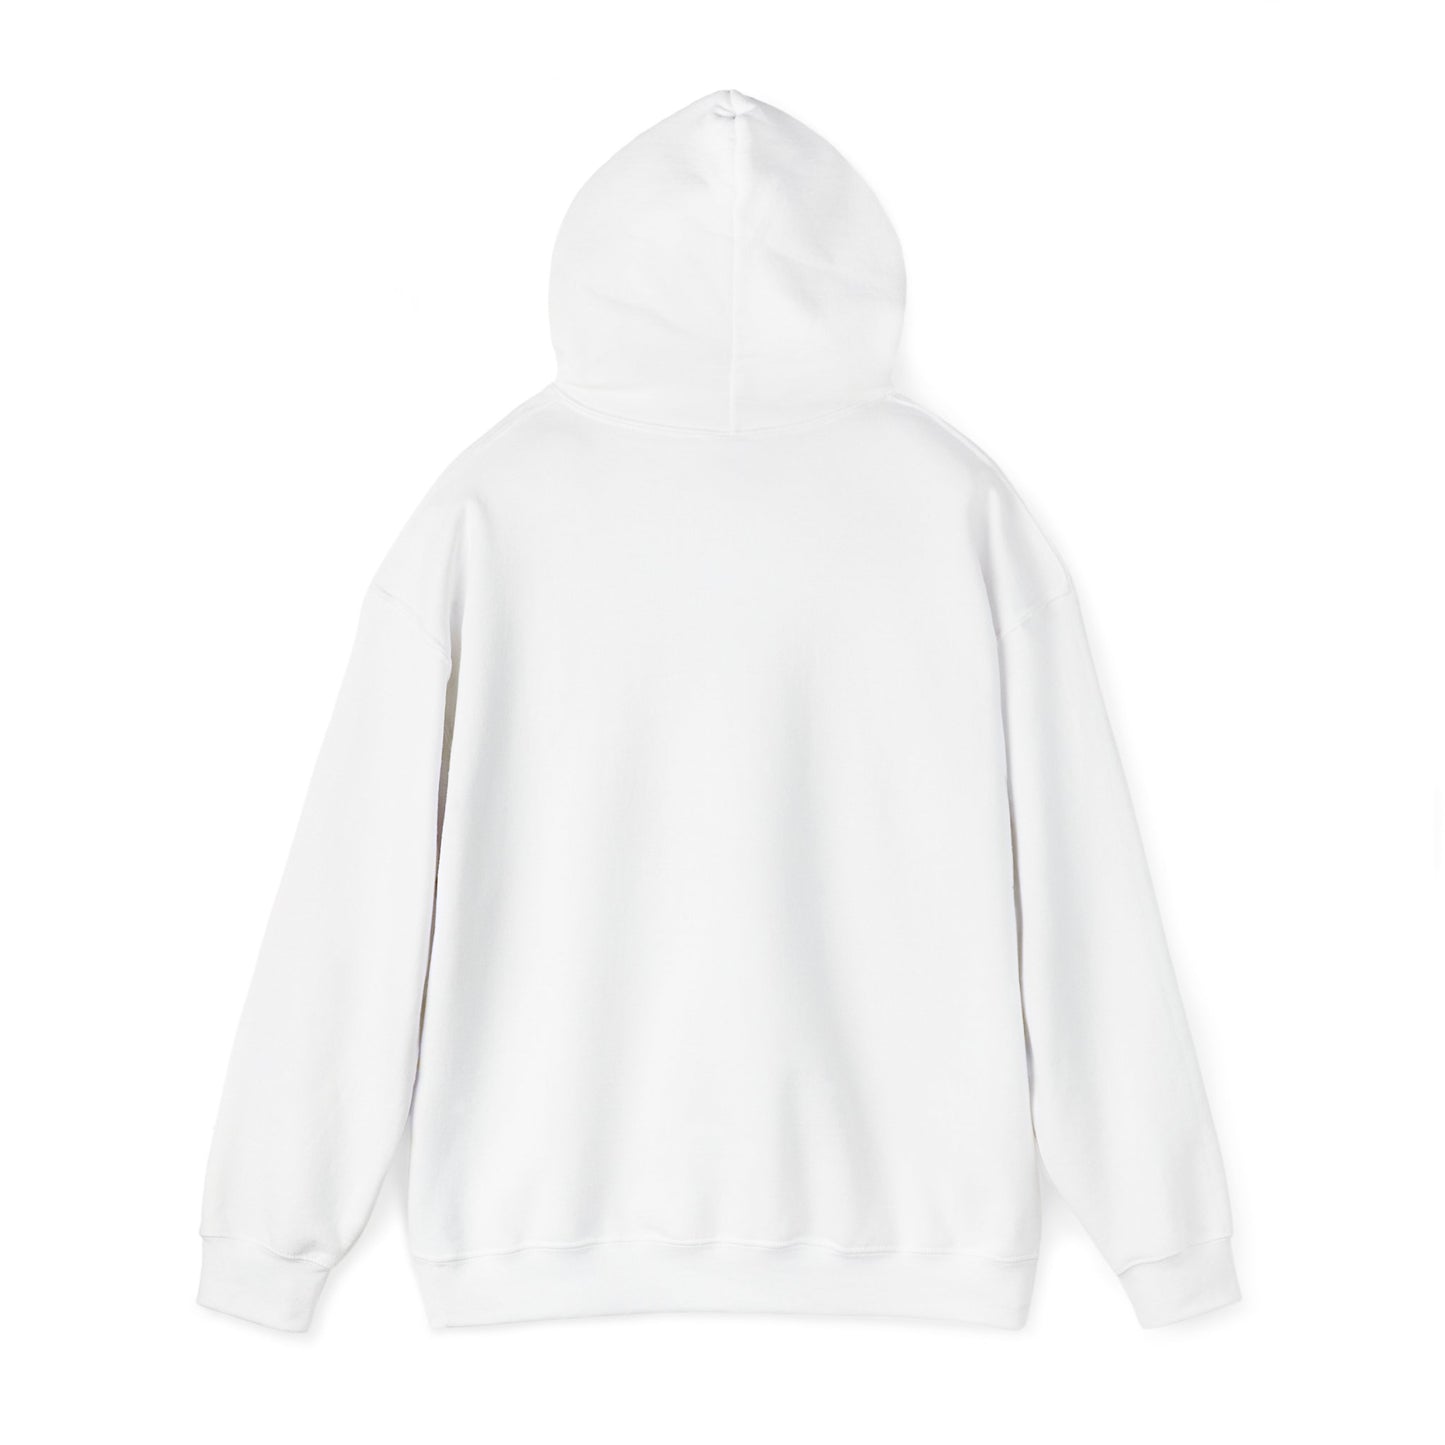 Capitol A's (front print) Unisex Heavy Blend™ Hooded Sweatshirt